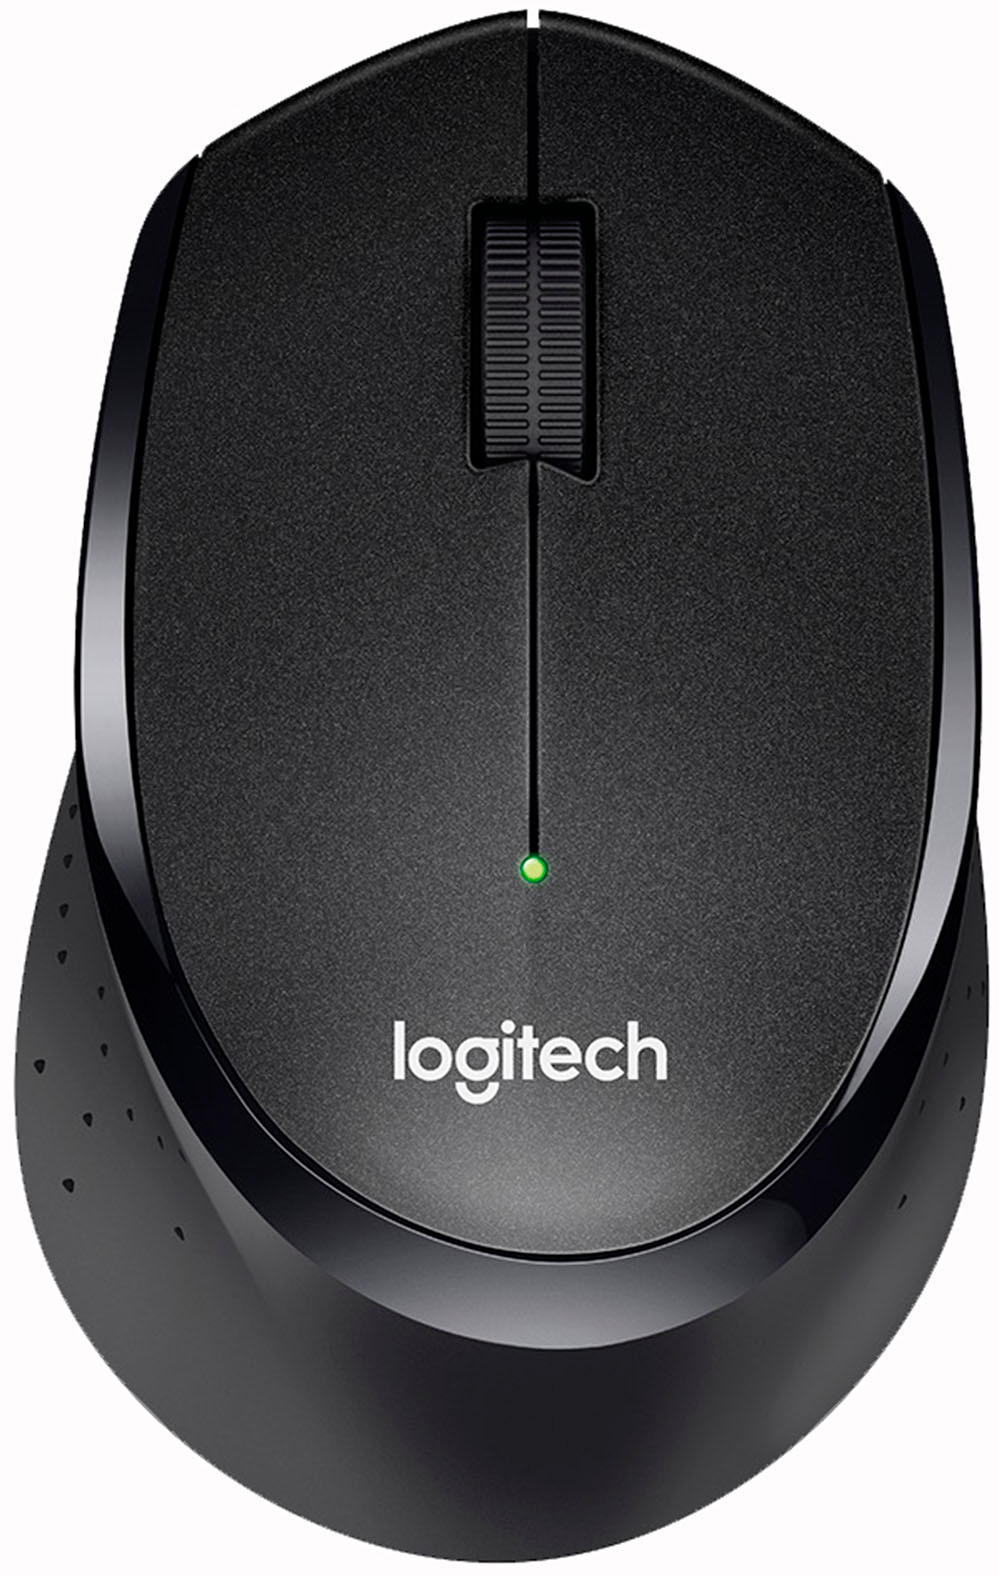 Logitech Unifying Receiver Review 